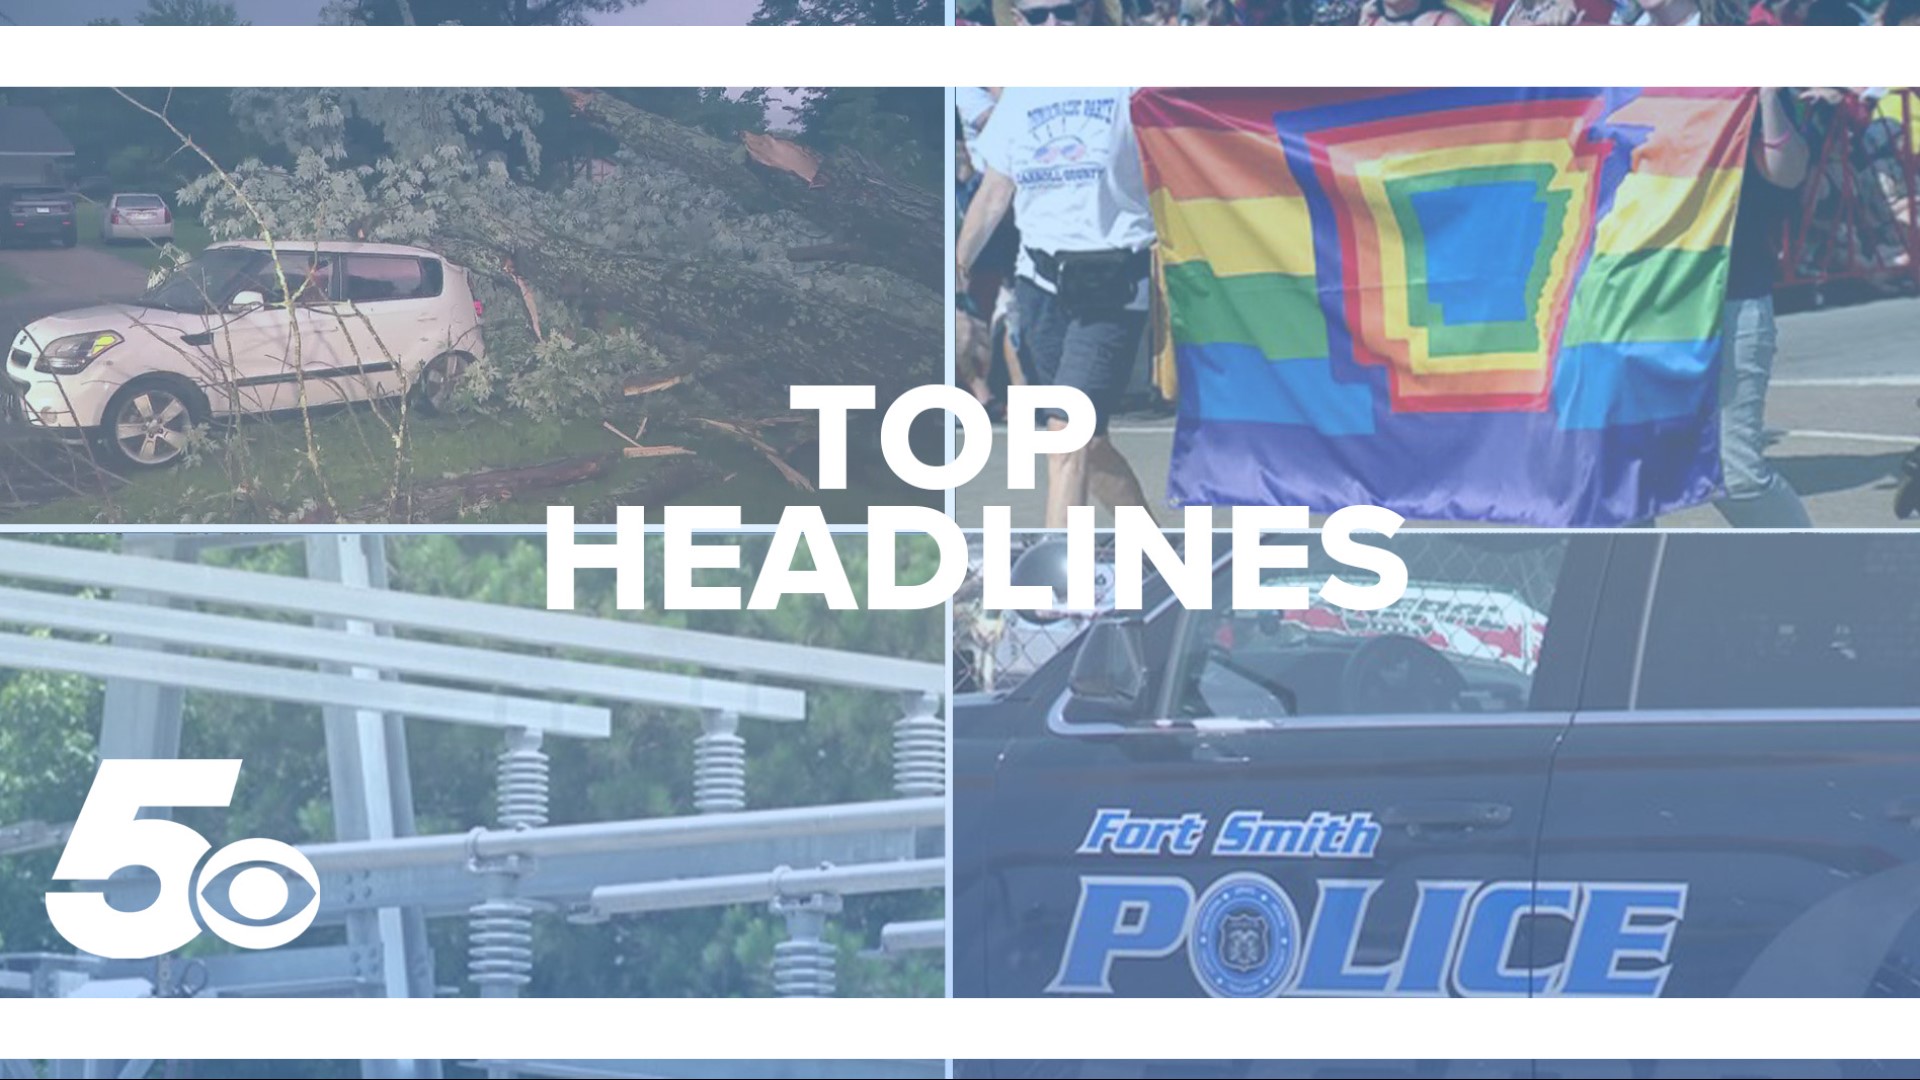 Check out today's top headlines including weather, Pride weekend, a Fort Smith shooting, and more.